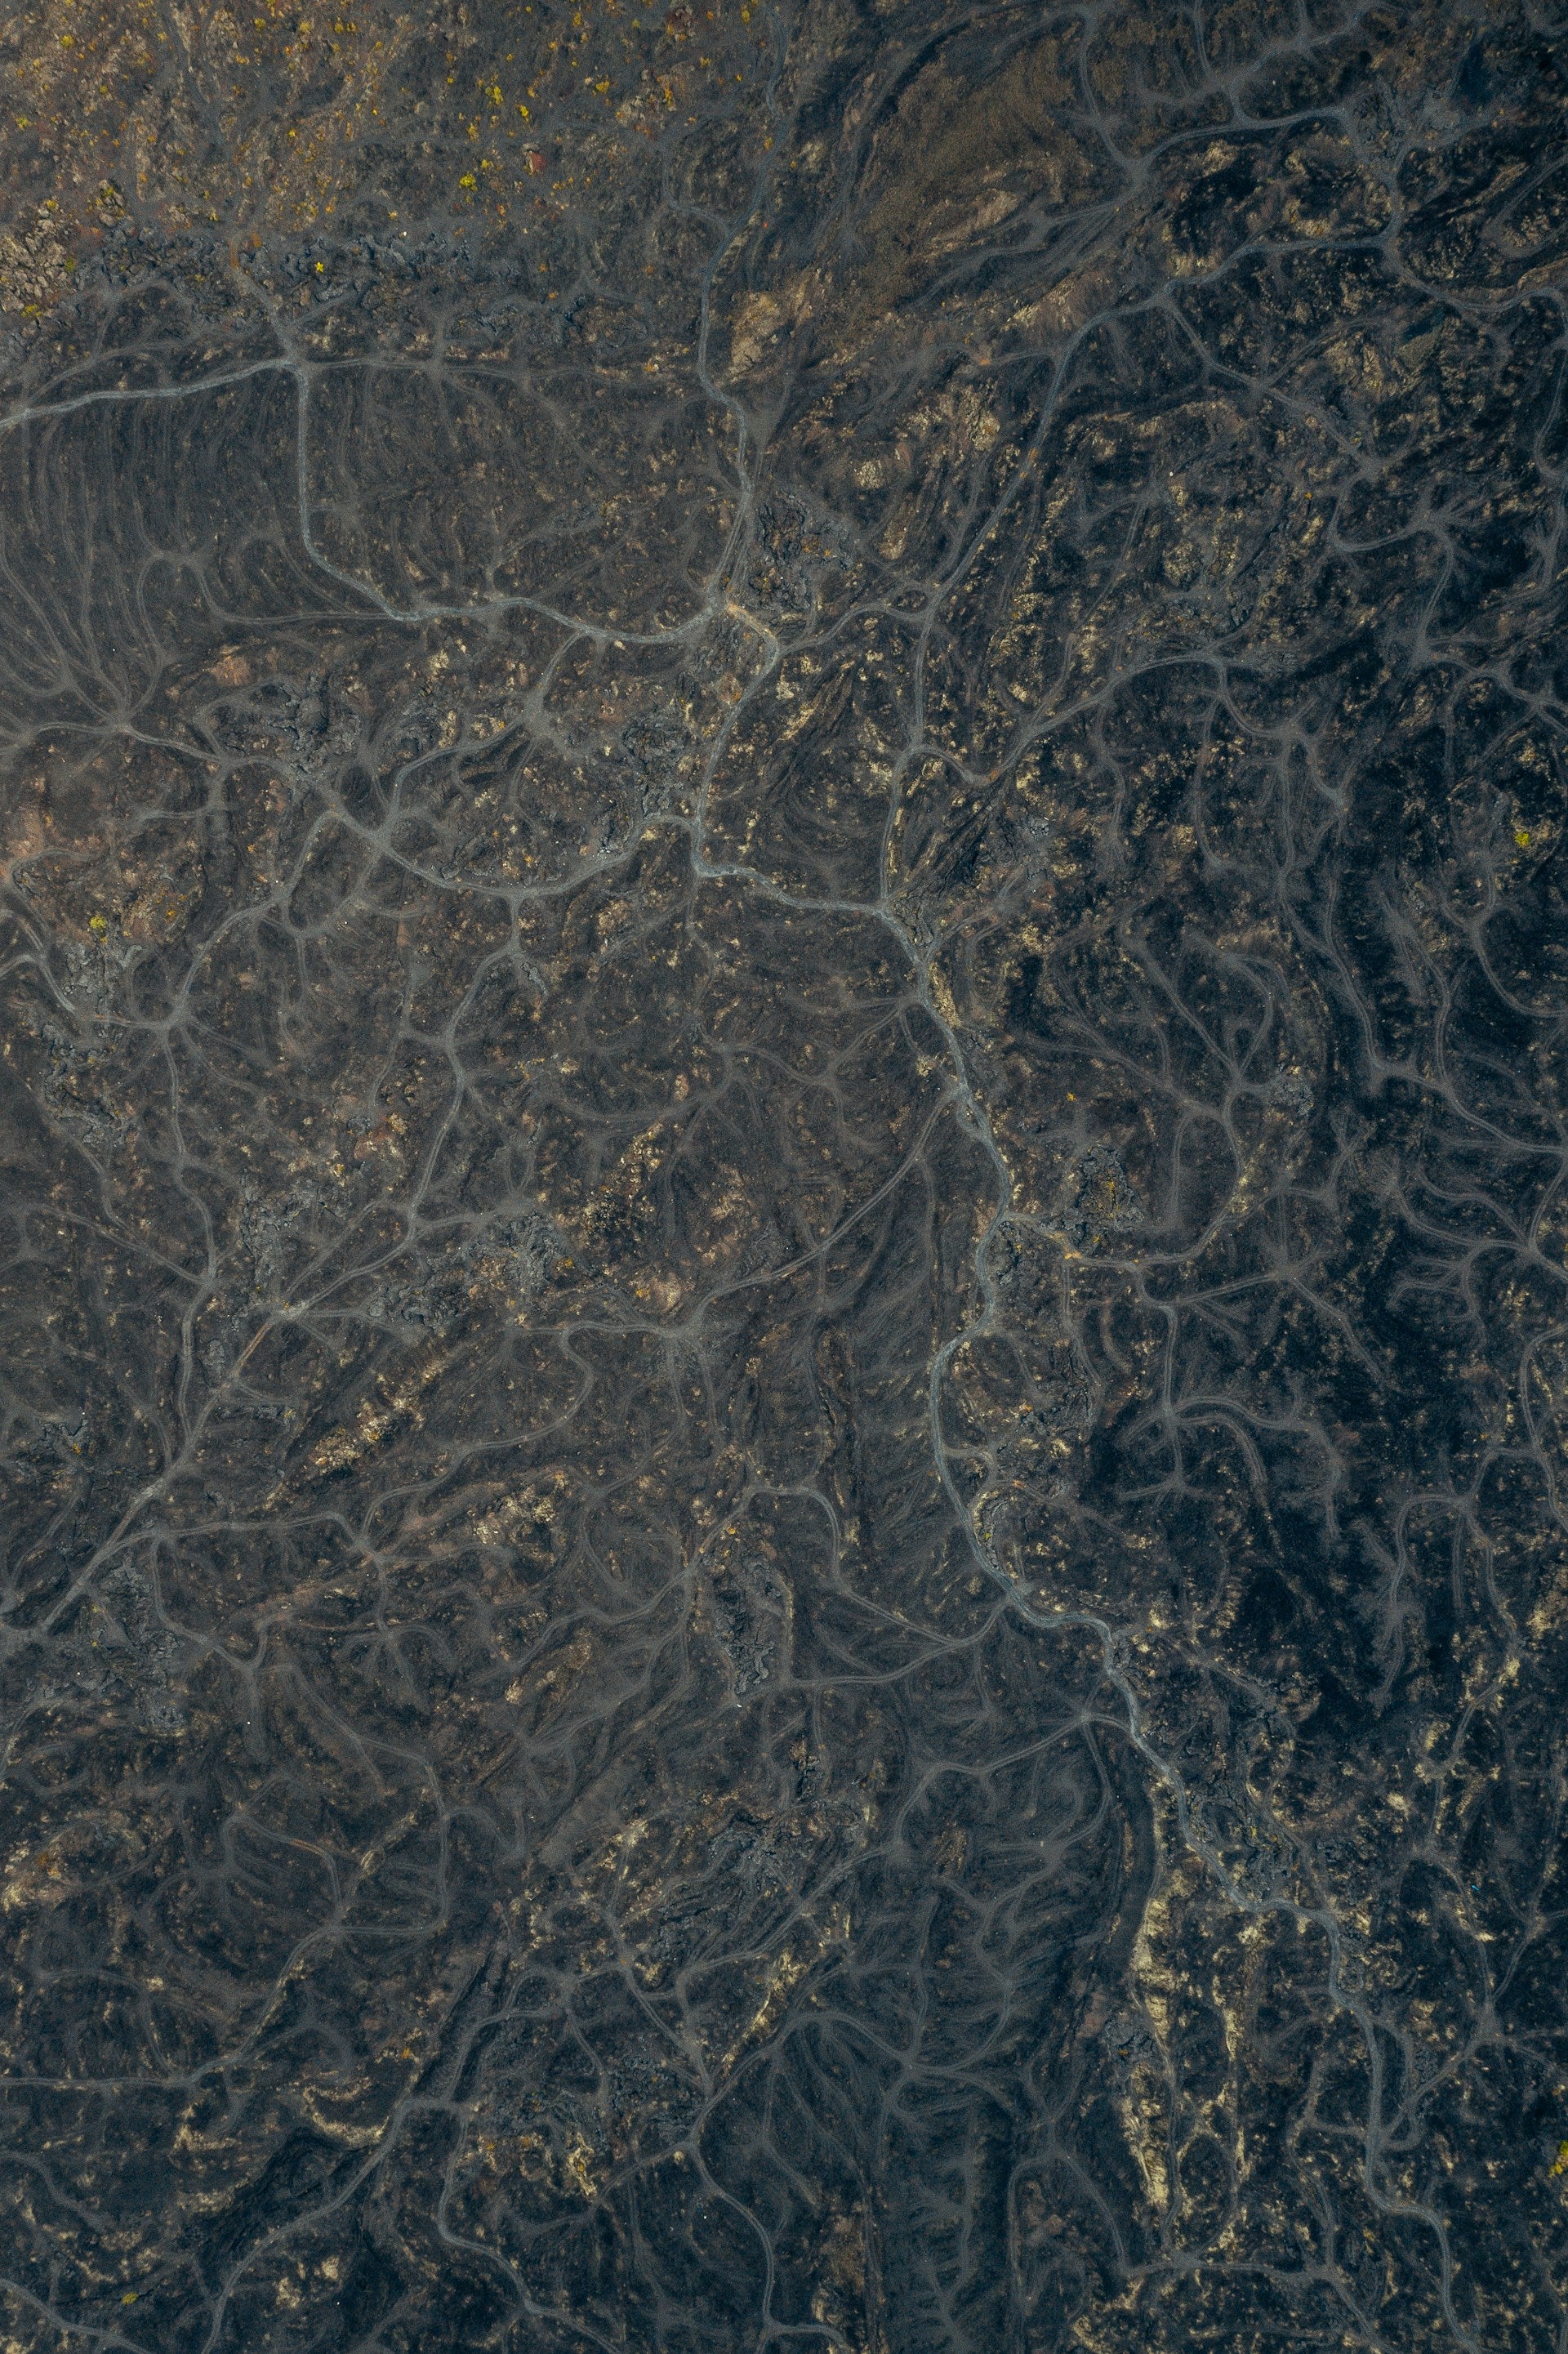 An aerial view of rivers flowing through the ground.